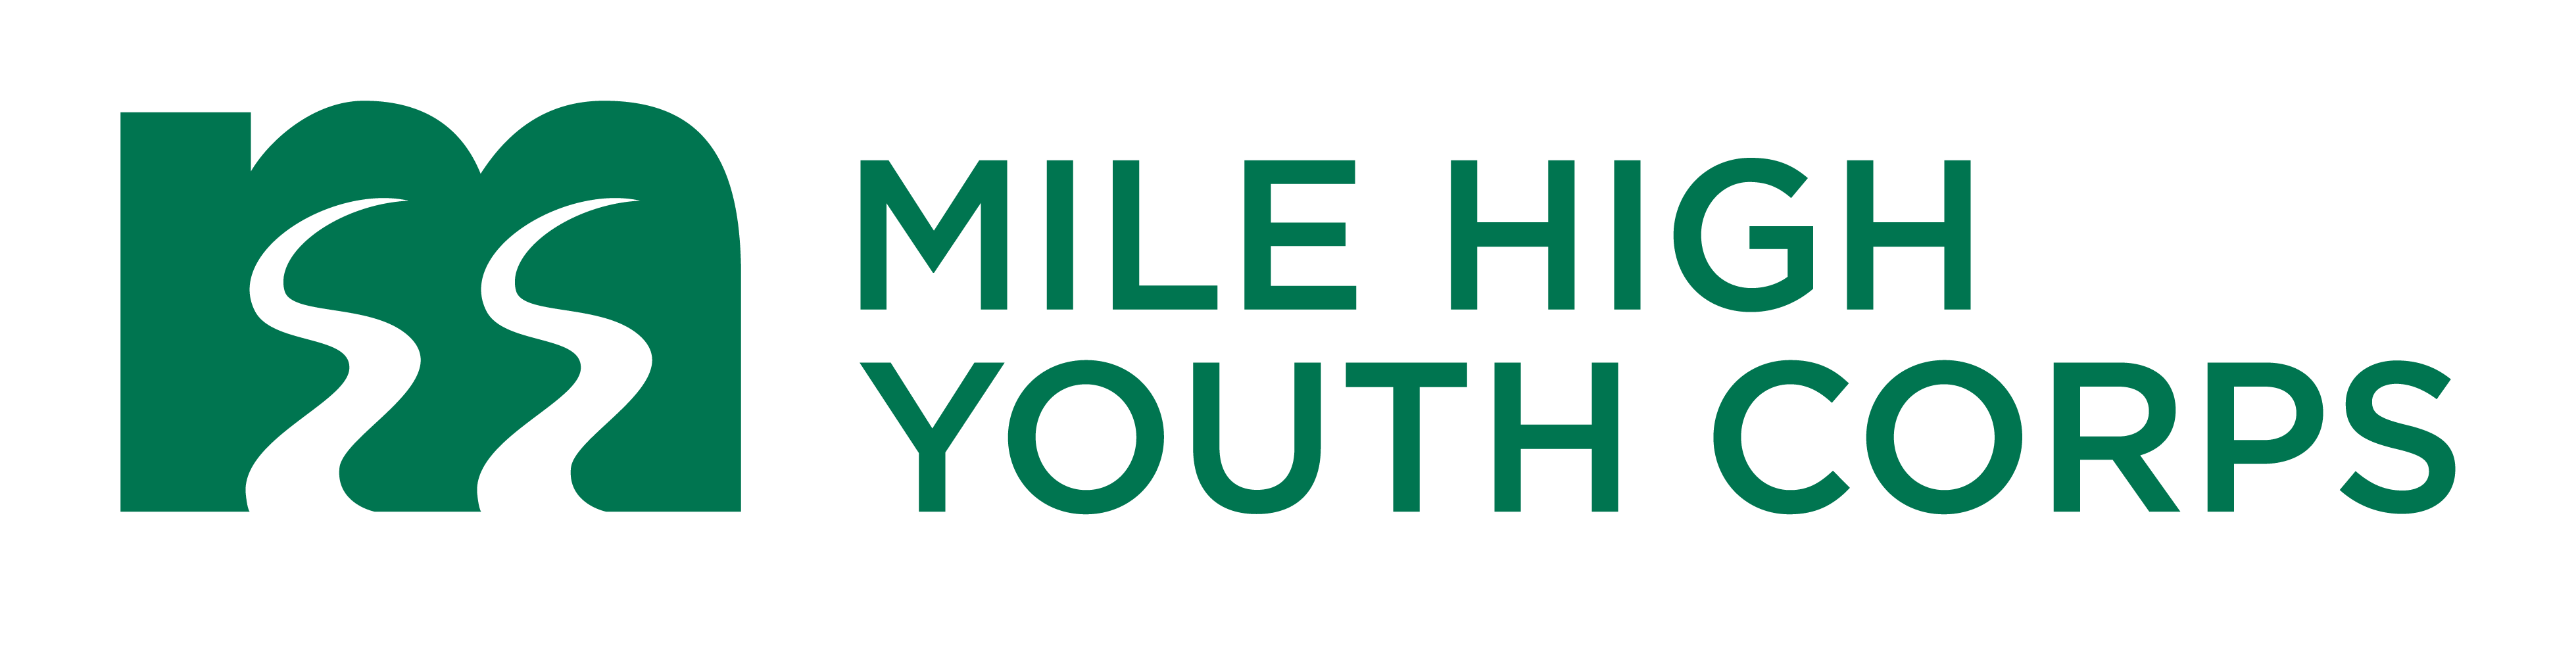 Mile High Youth Corps